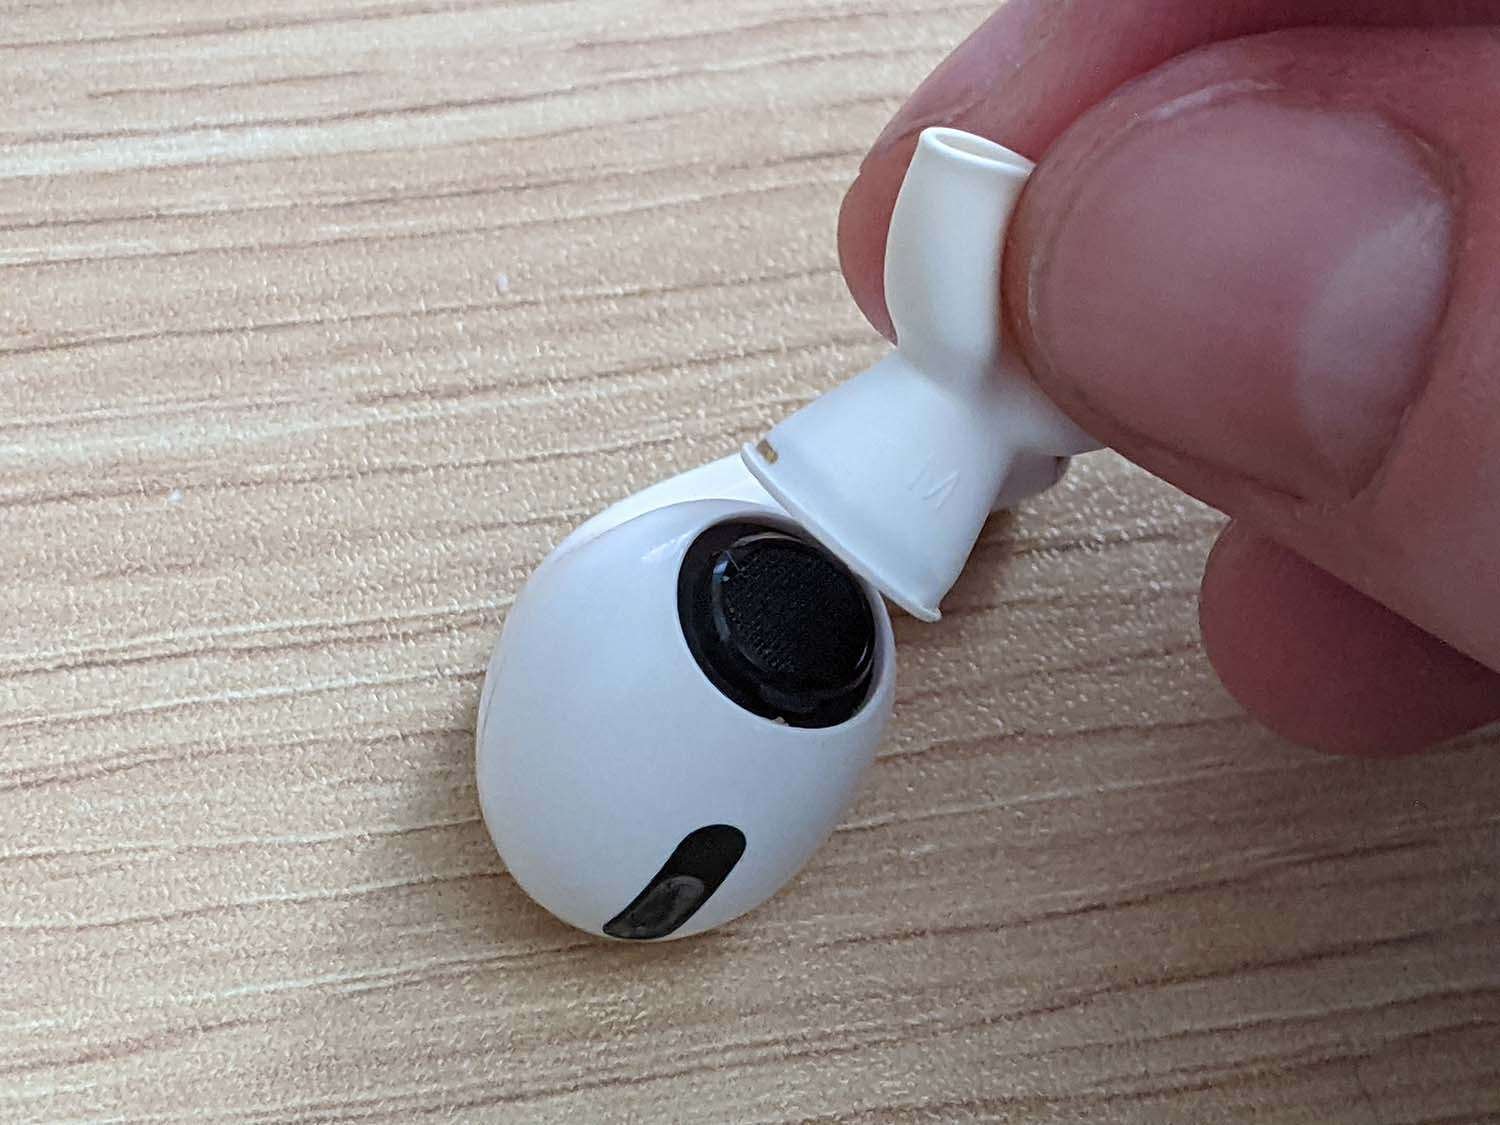 how to replace airpod pro tips